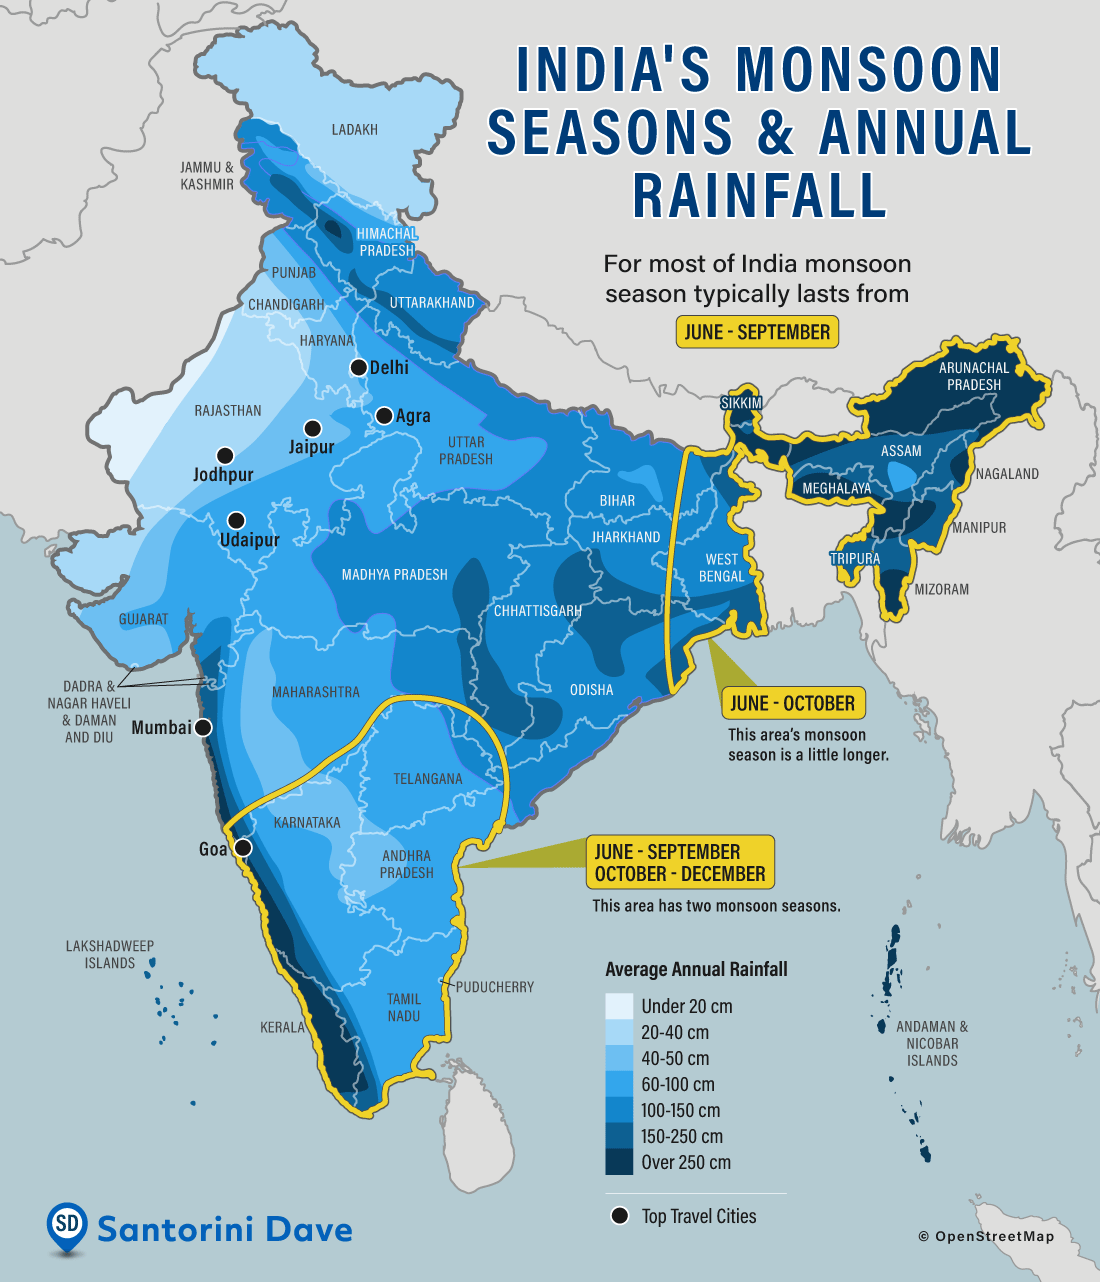 Wet and dry seasons in India.